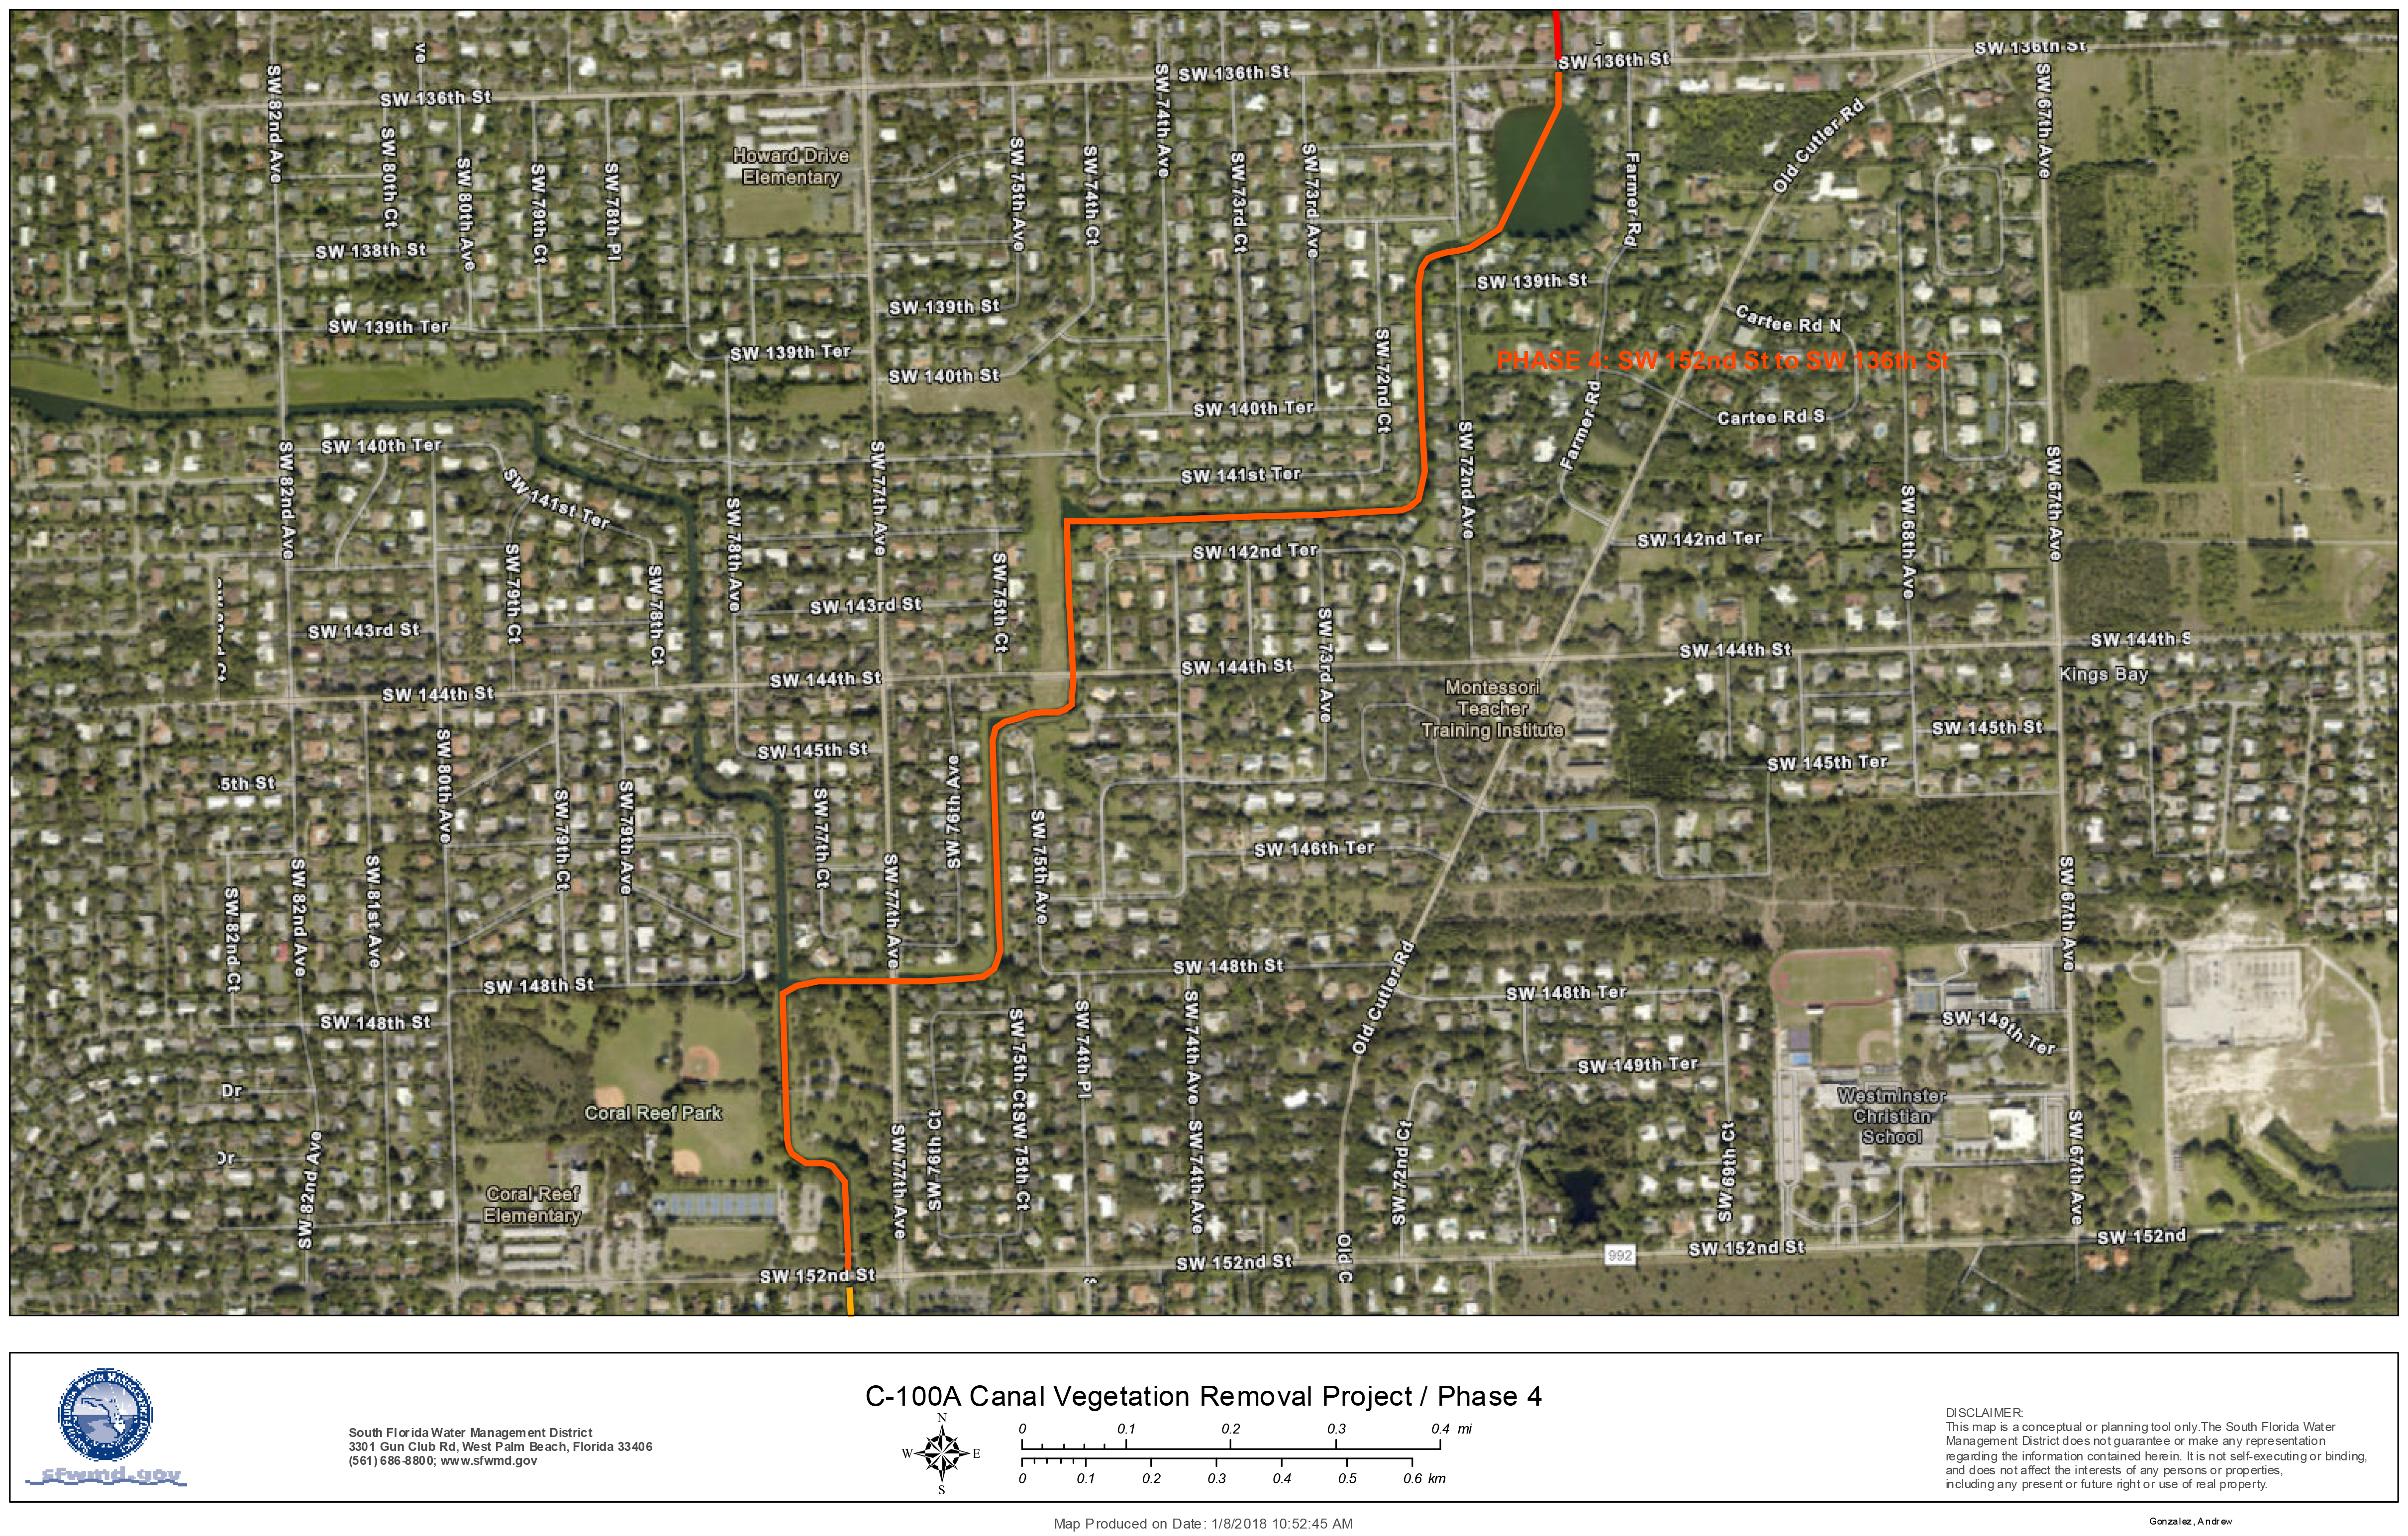 MAP: C-100A Canal Vegetation Removal Project - Phase 4